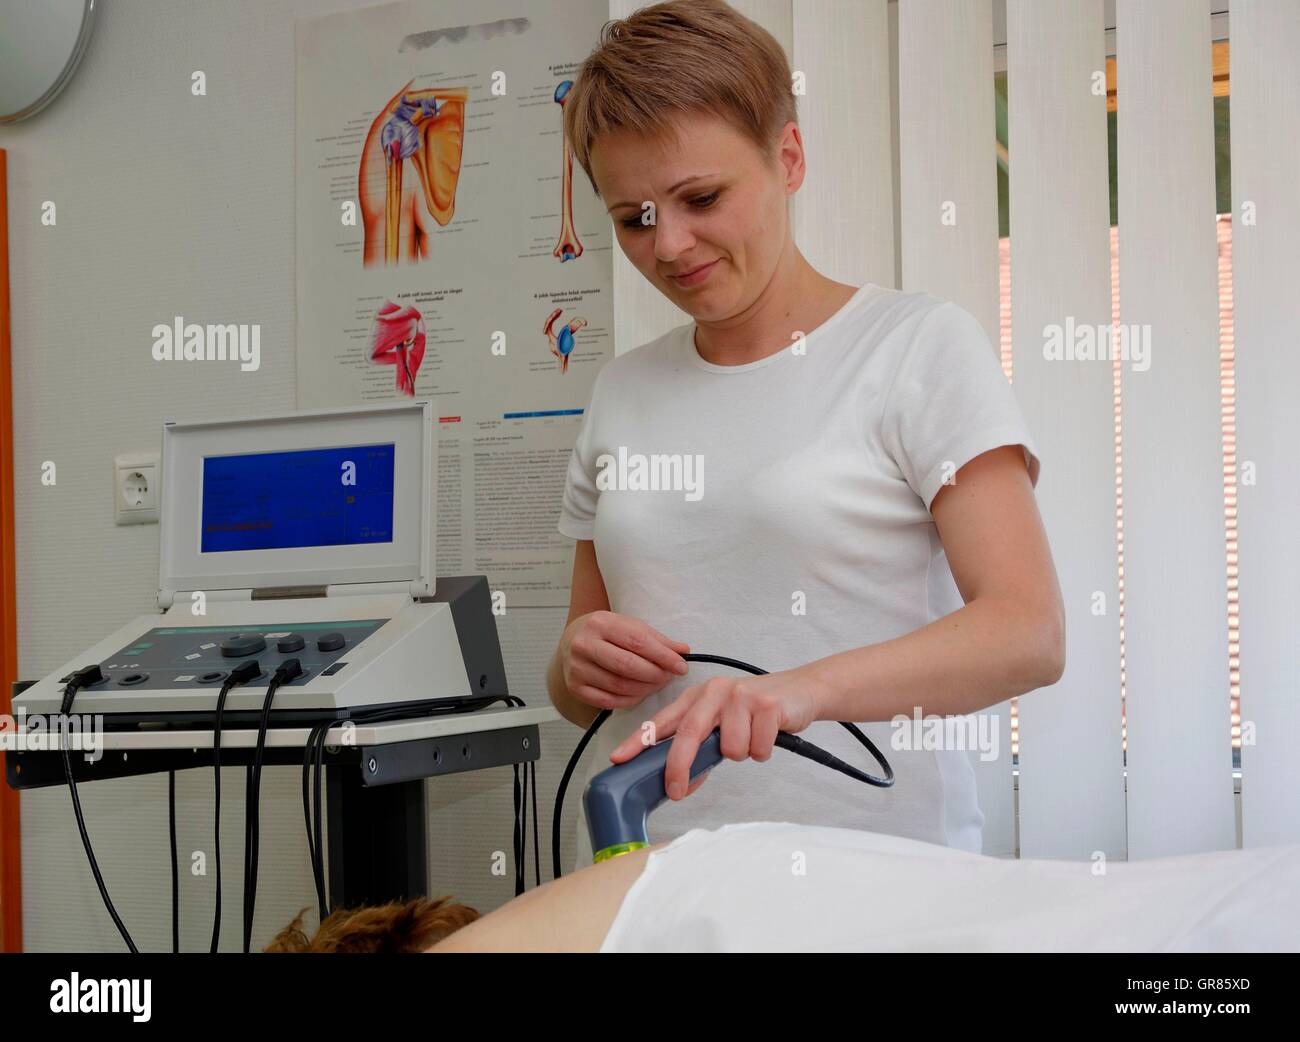 Electric Physiotherapy Application By Therapist On The Back Of A Woman In Spa Cegled Stock Photo